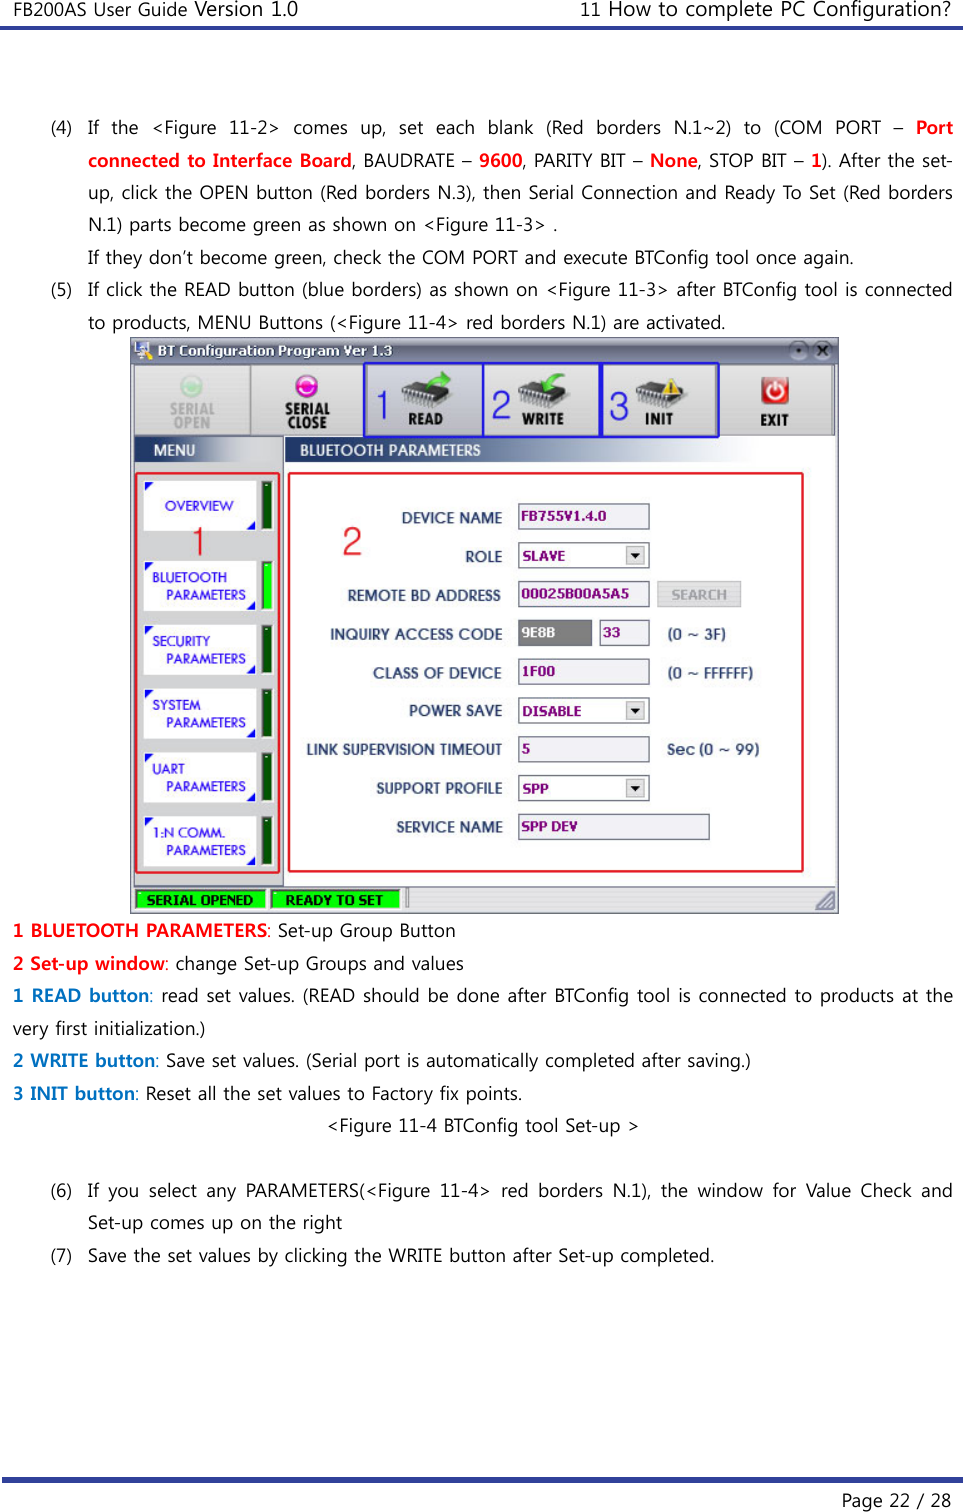 FB200AS User Guide Version 1.0 11 How to complete PC Configuration?  Page 22 / 28  (4) If the &lt;Figure 11-2&gt; comes up, set each blank (Red borders N.1~2)  to  (COM  PORT  – Port connected to Interface Board, BAUDRATE – 9600, PARITY BIT – None, STOP BIT – 1). After the set-up, click the OPEN button (Red borders N.3), then Serial Connection and Ready To Set (Red borders N.1) parts become green as shown on &lt;Figure 11-3&gt; . If they don’t become green, check the COM PORT and execute BTConfig tool once again. (5) If click the READ button (blue borders) as shown on &lt;Figure 11-3&gt; after BTConfig tool is connected to products, MENU Buttons (&lt;Figure 11-4&gt; red borders N.1) are activated.  1 BLUETOOTH PARAMETERS: Set-up Group Button 2 Set-up window: change Set-up Groups and values 1 READ button: read set values. (READ should be done after BTConfig tool is connected to products at the very first initialization.) 2 WRITE button: Save set values. (Serial port is automatically completed after saving.) 3 INIT button: Reset all the set values to Factory fix points. &lt;Figure 11-4 BTConfig tool Set-up &gt;  (6) If you select any PARAMETERS(&lt;Figure 11-4&gt; red borders N.1), the  window  for  Value  Check  and Set-up comes up on the right (7) Save the set values by clicking the WRITE button after Set-up completed. 